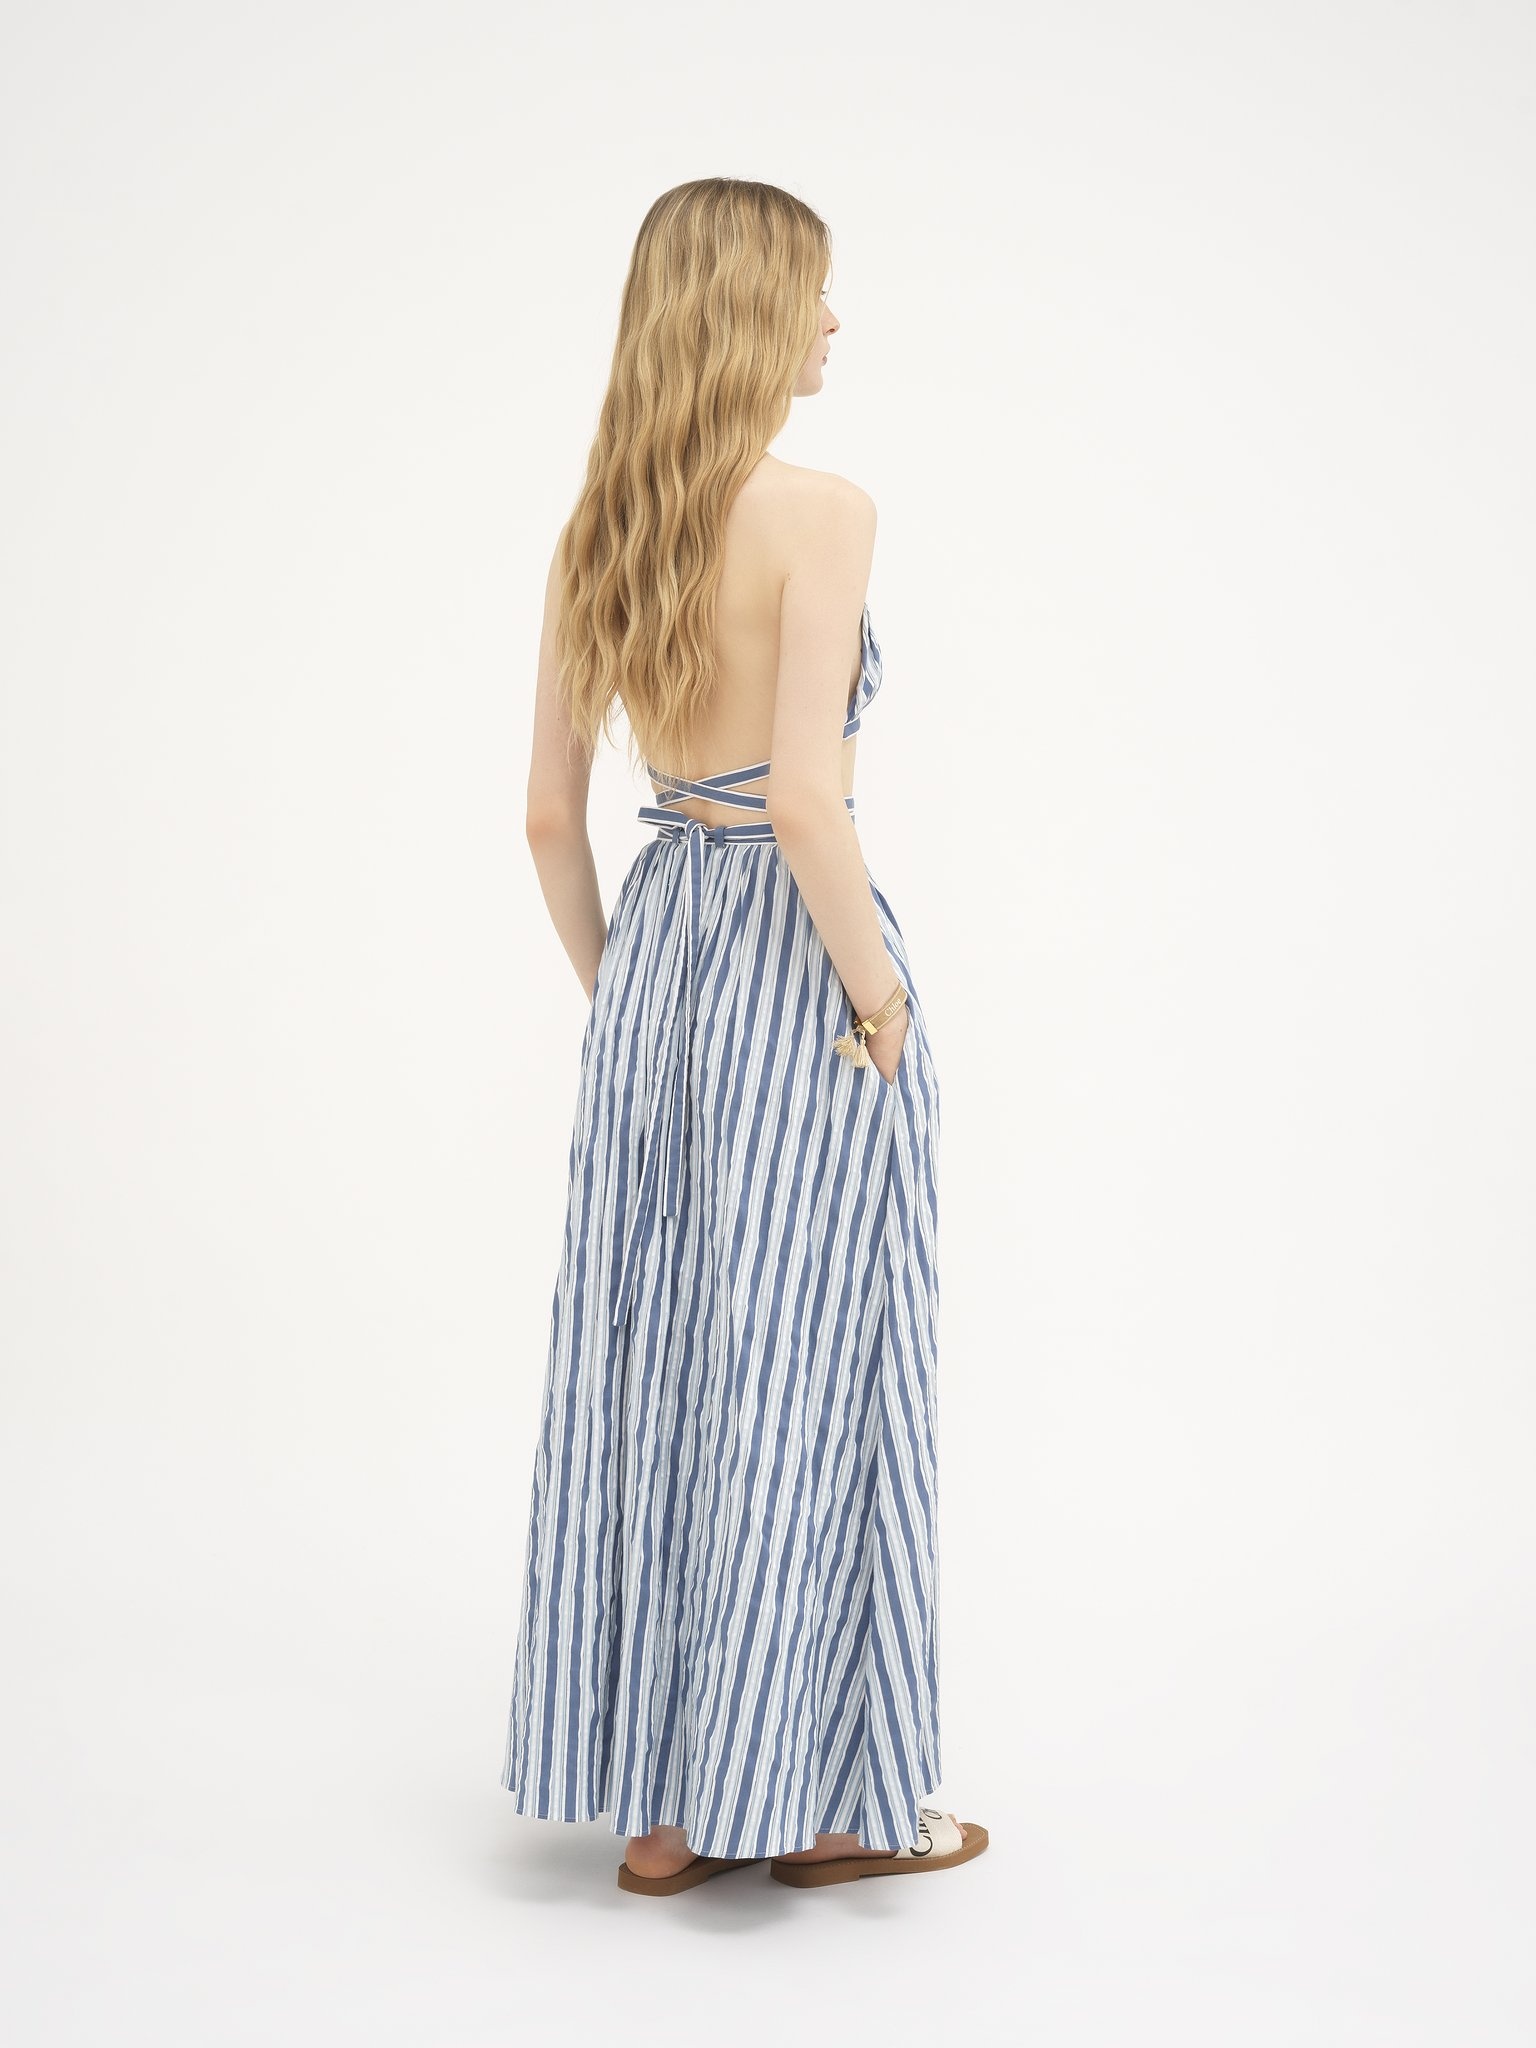 TWO-PART BACKLESS DRESS - 4